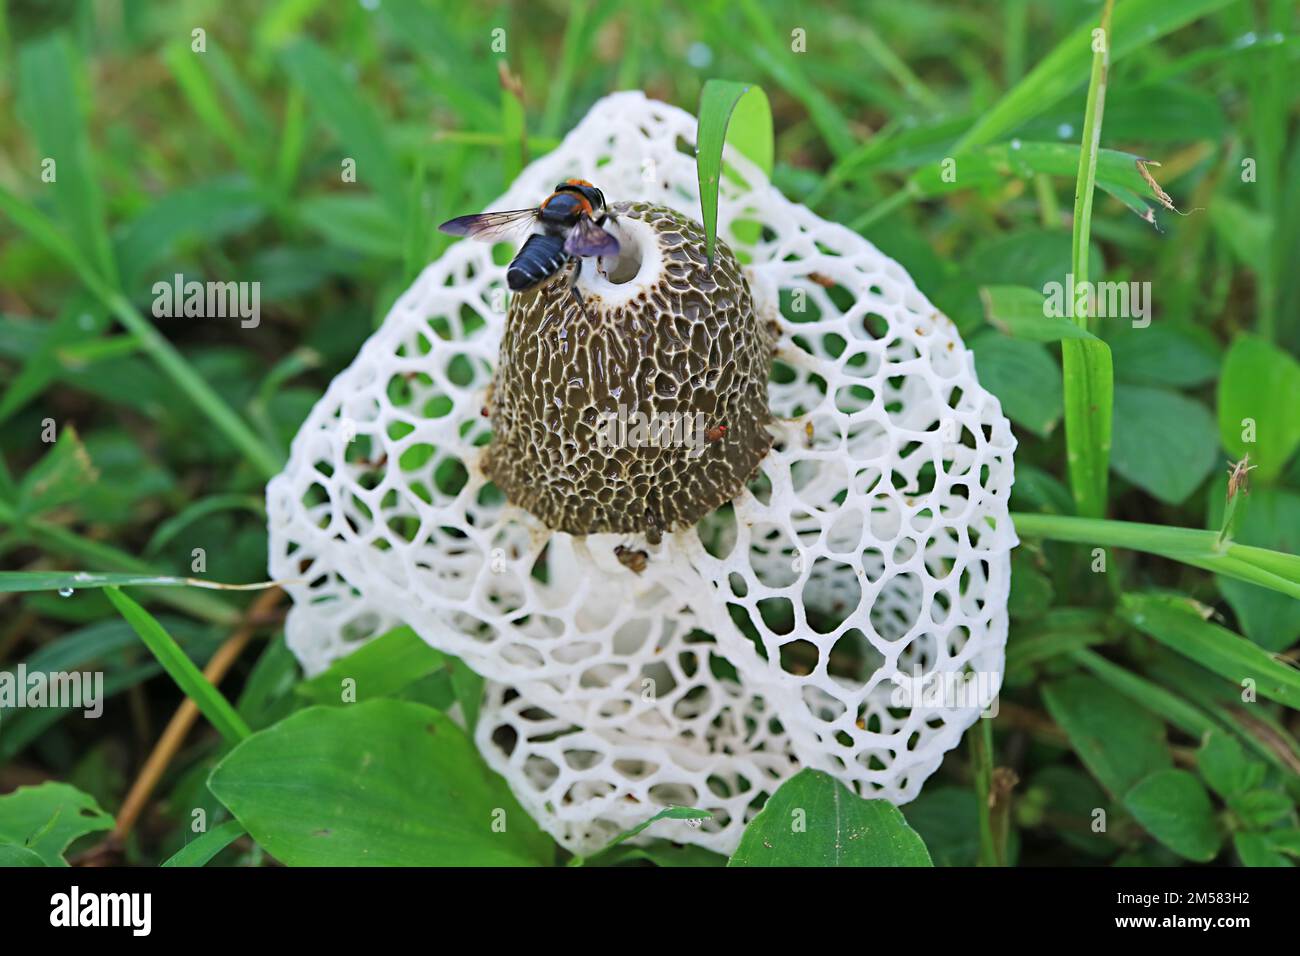 Closeup of Bamboo Fungus or White Long Net Stinkhorn Mushroom with a Bee in the Field Stock Photo